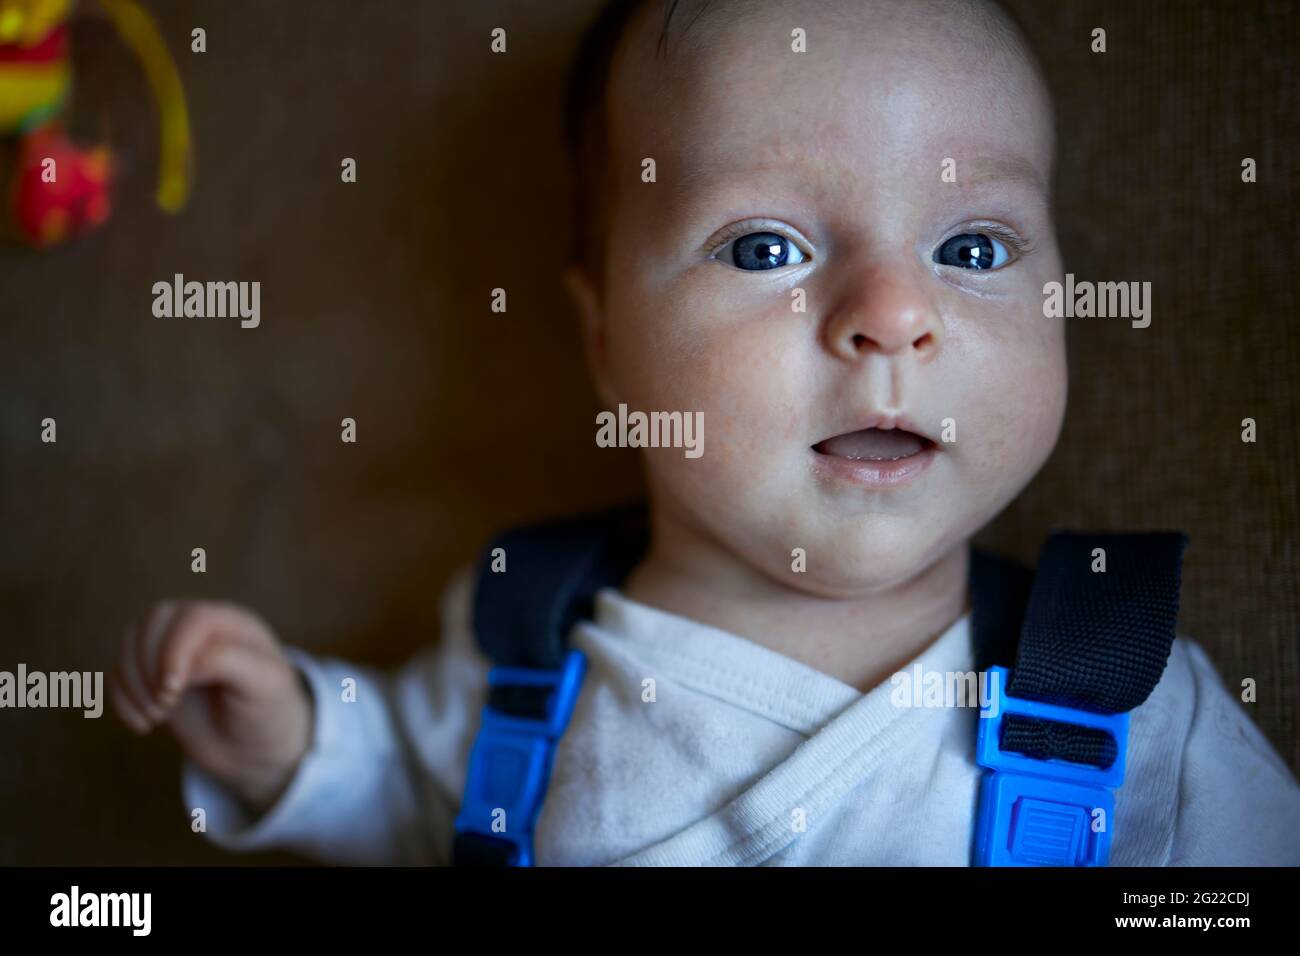 Close up portrait of a cheerful baby's face Stock Photo